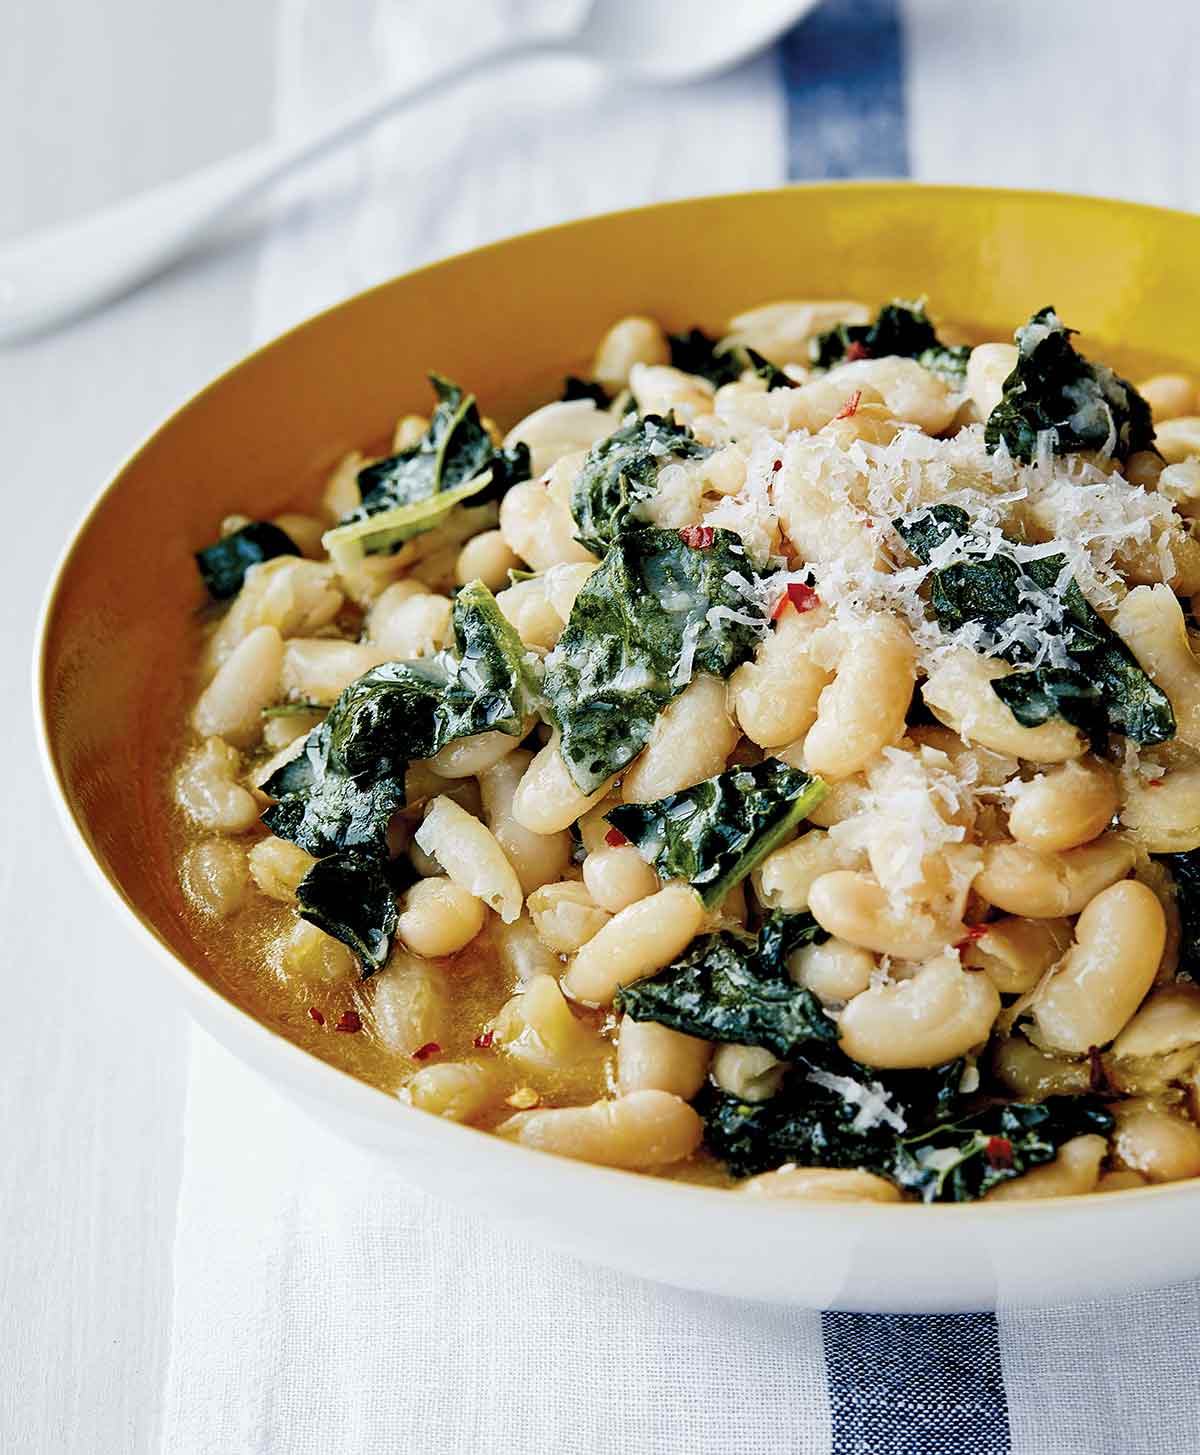 A bowl of white beans and Tuscan kale, sprinkled with grated Parmesan cheese, with a spoon.